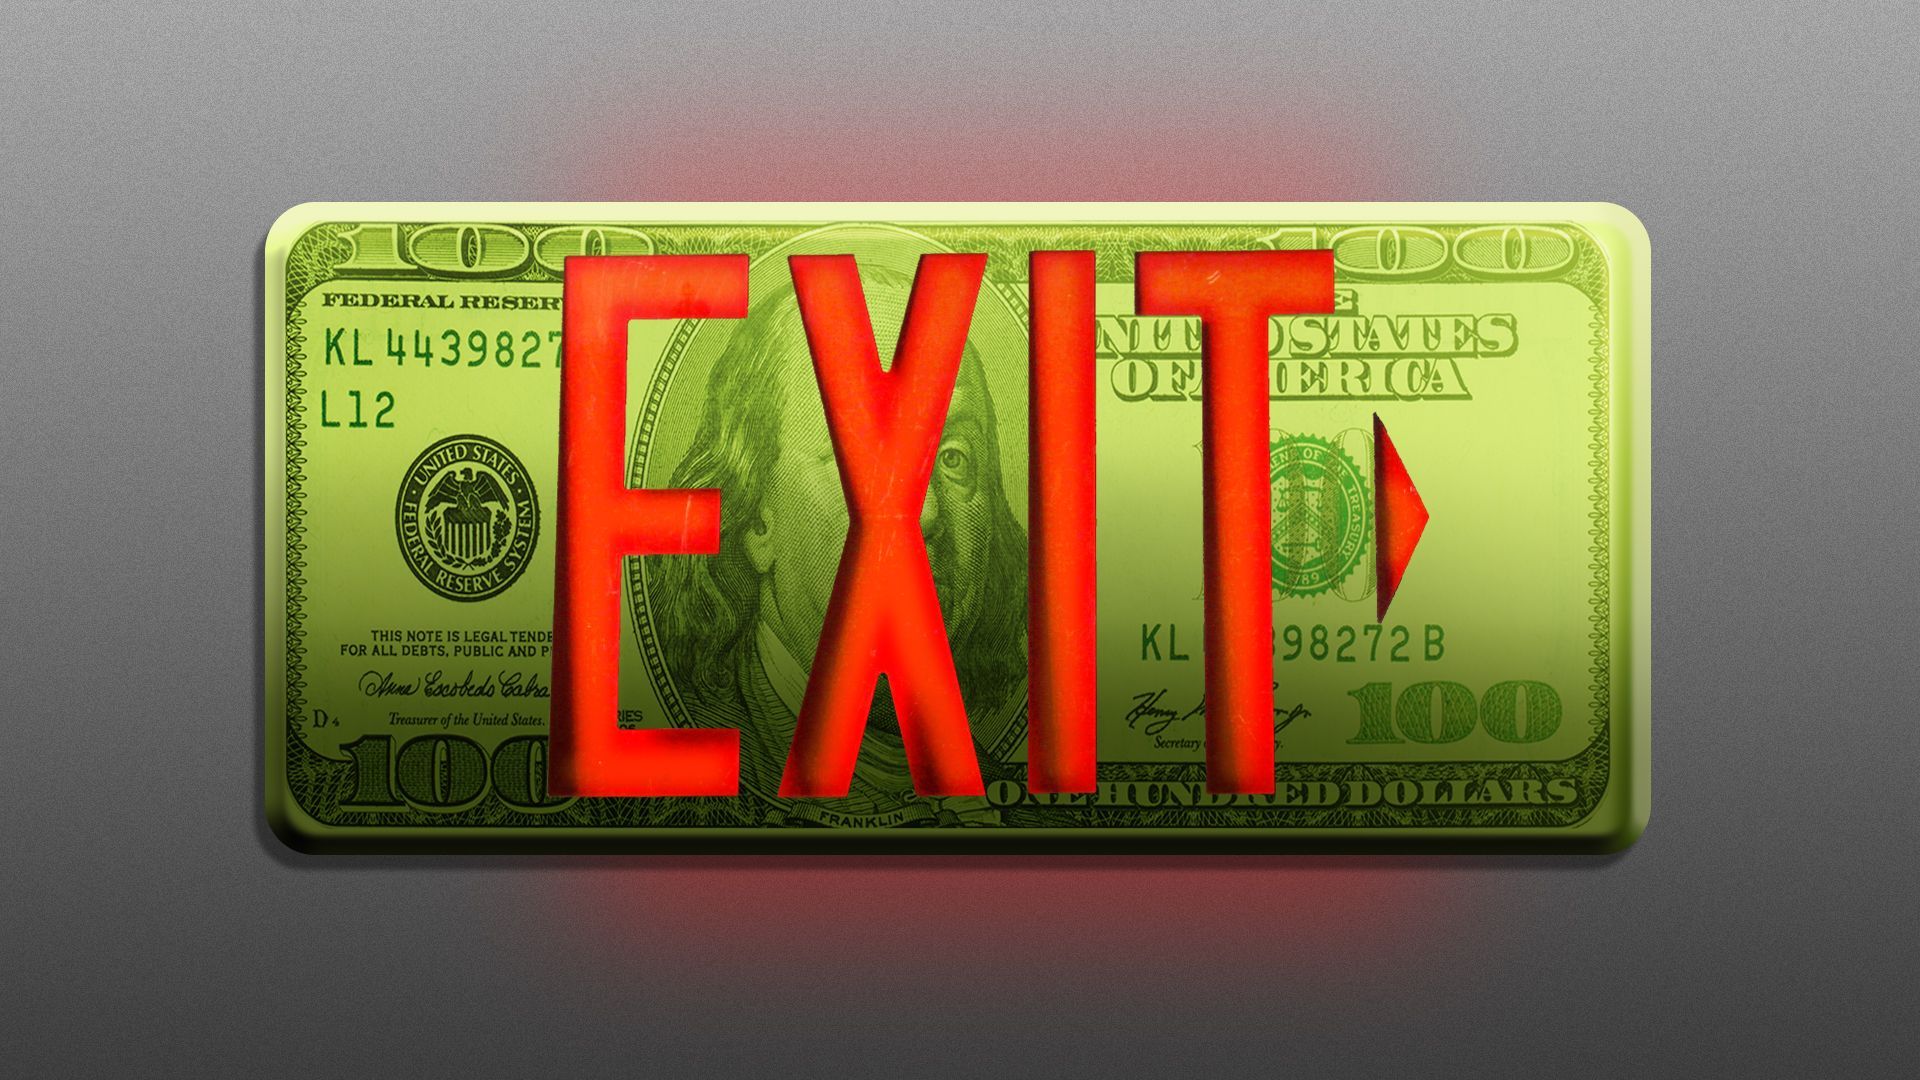 Illustration of an exit sign made out of a hundred dollar bill